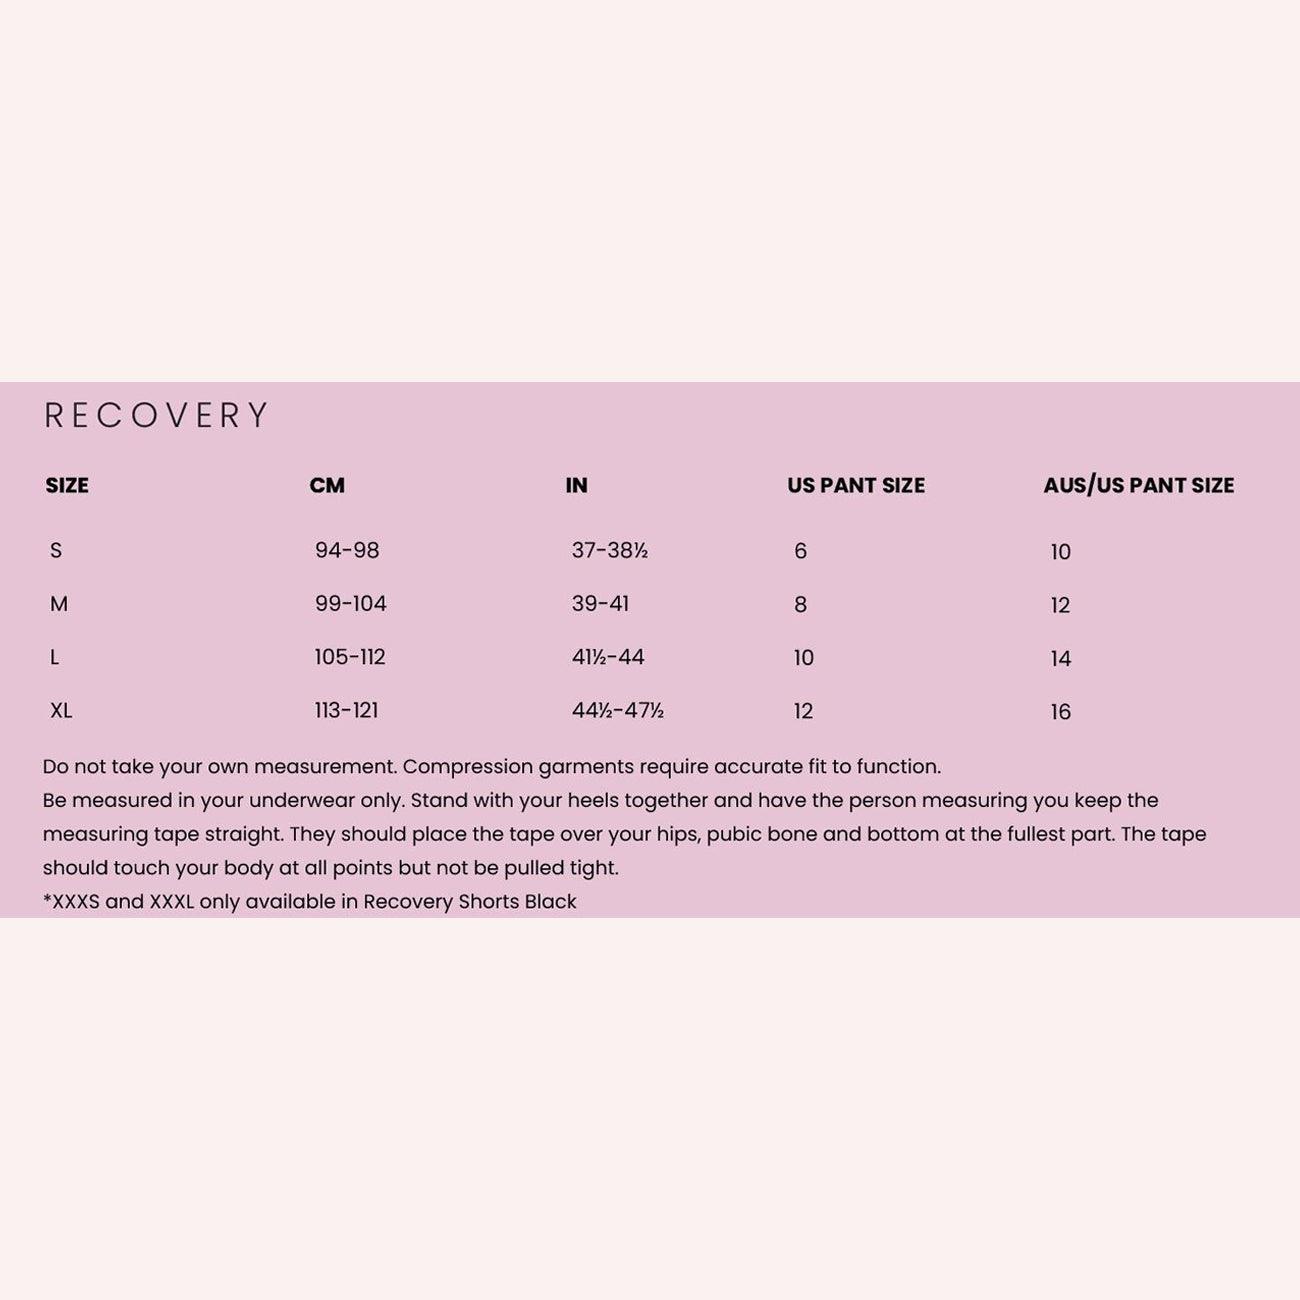 SRC Recovery Measurements